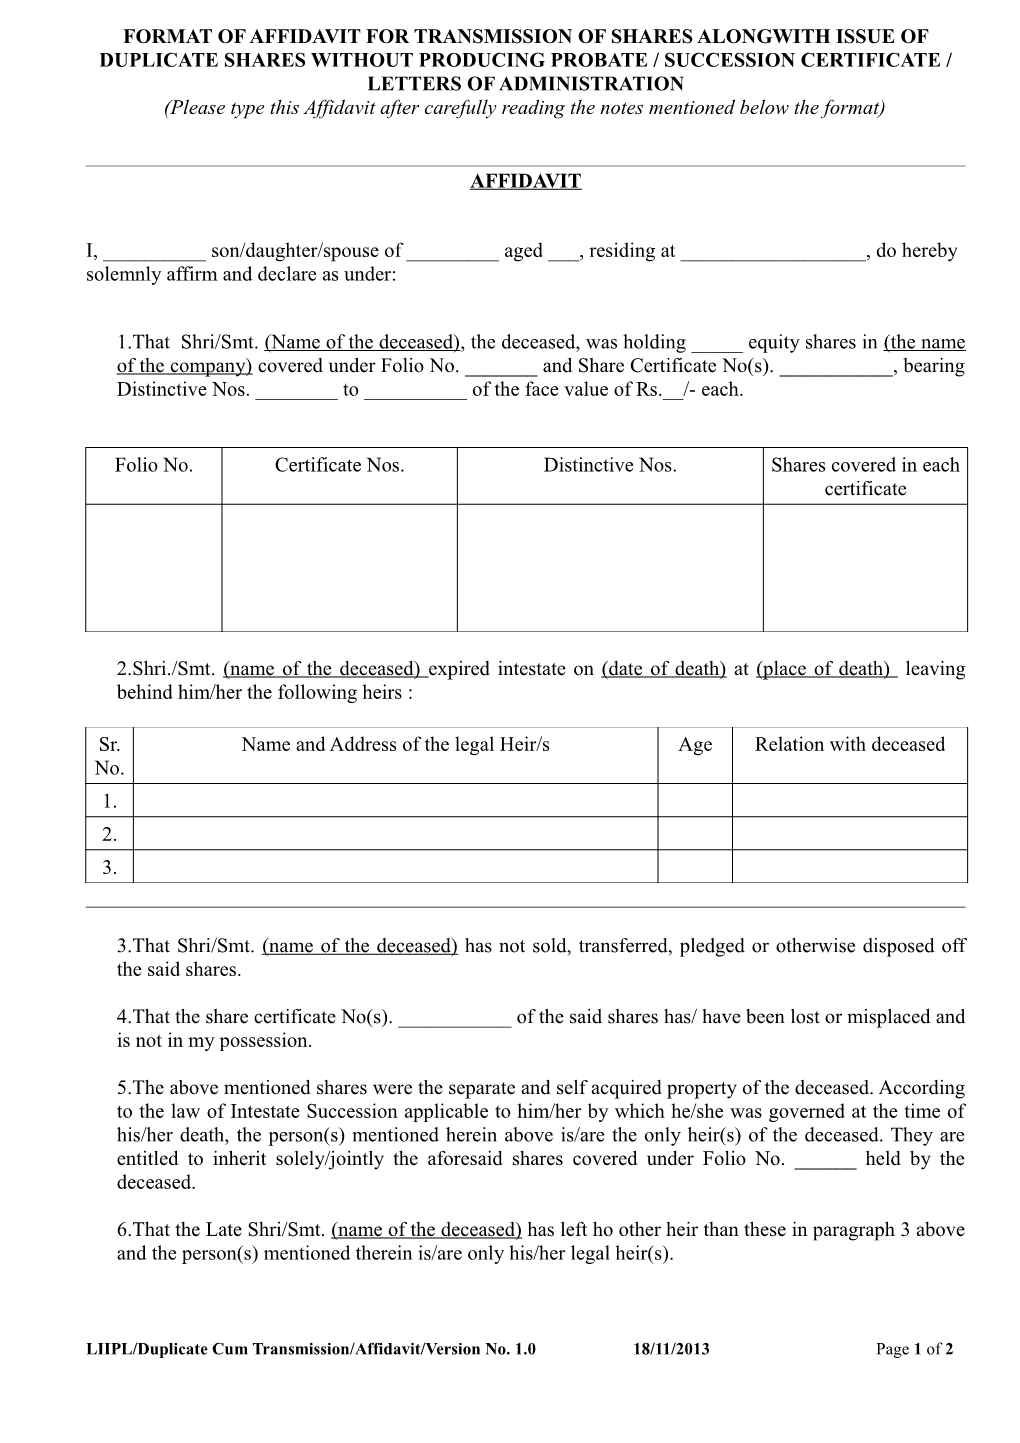 Format of Affidavit for Transmission of Shares Alongwith Issue of Duplicate Shares Without